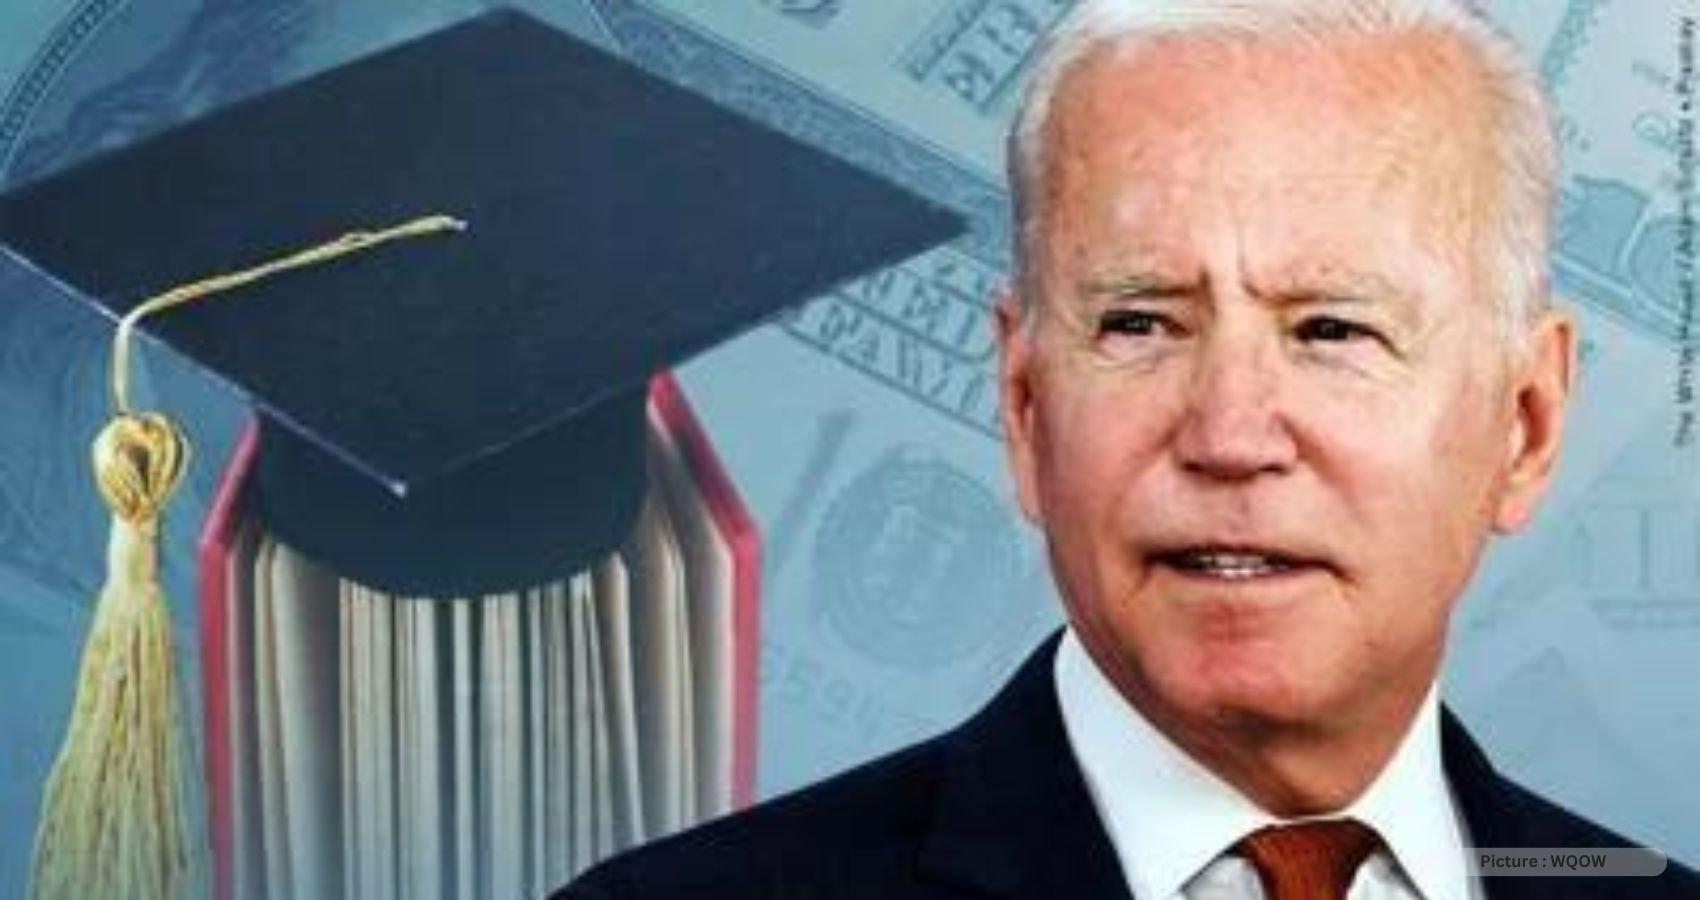 Biden’s Plan Cuts Student Loan Payments for Millions to $0